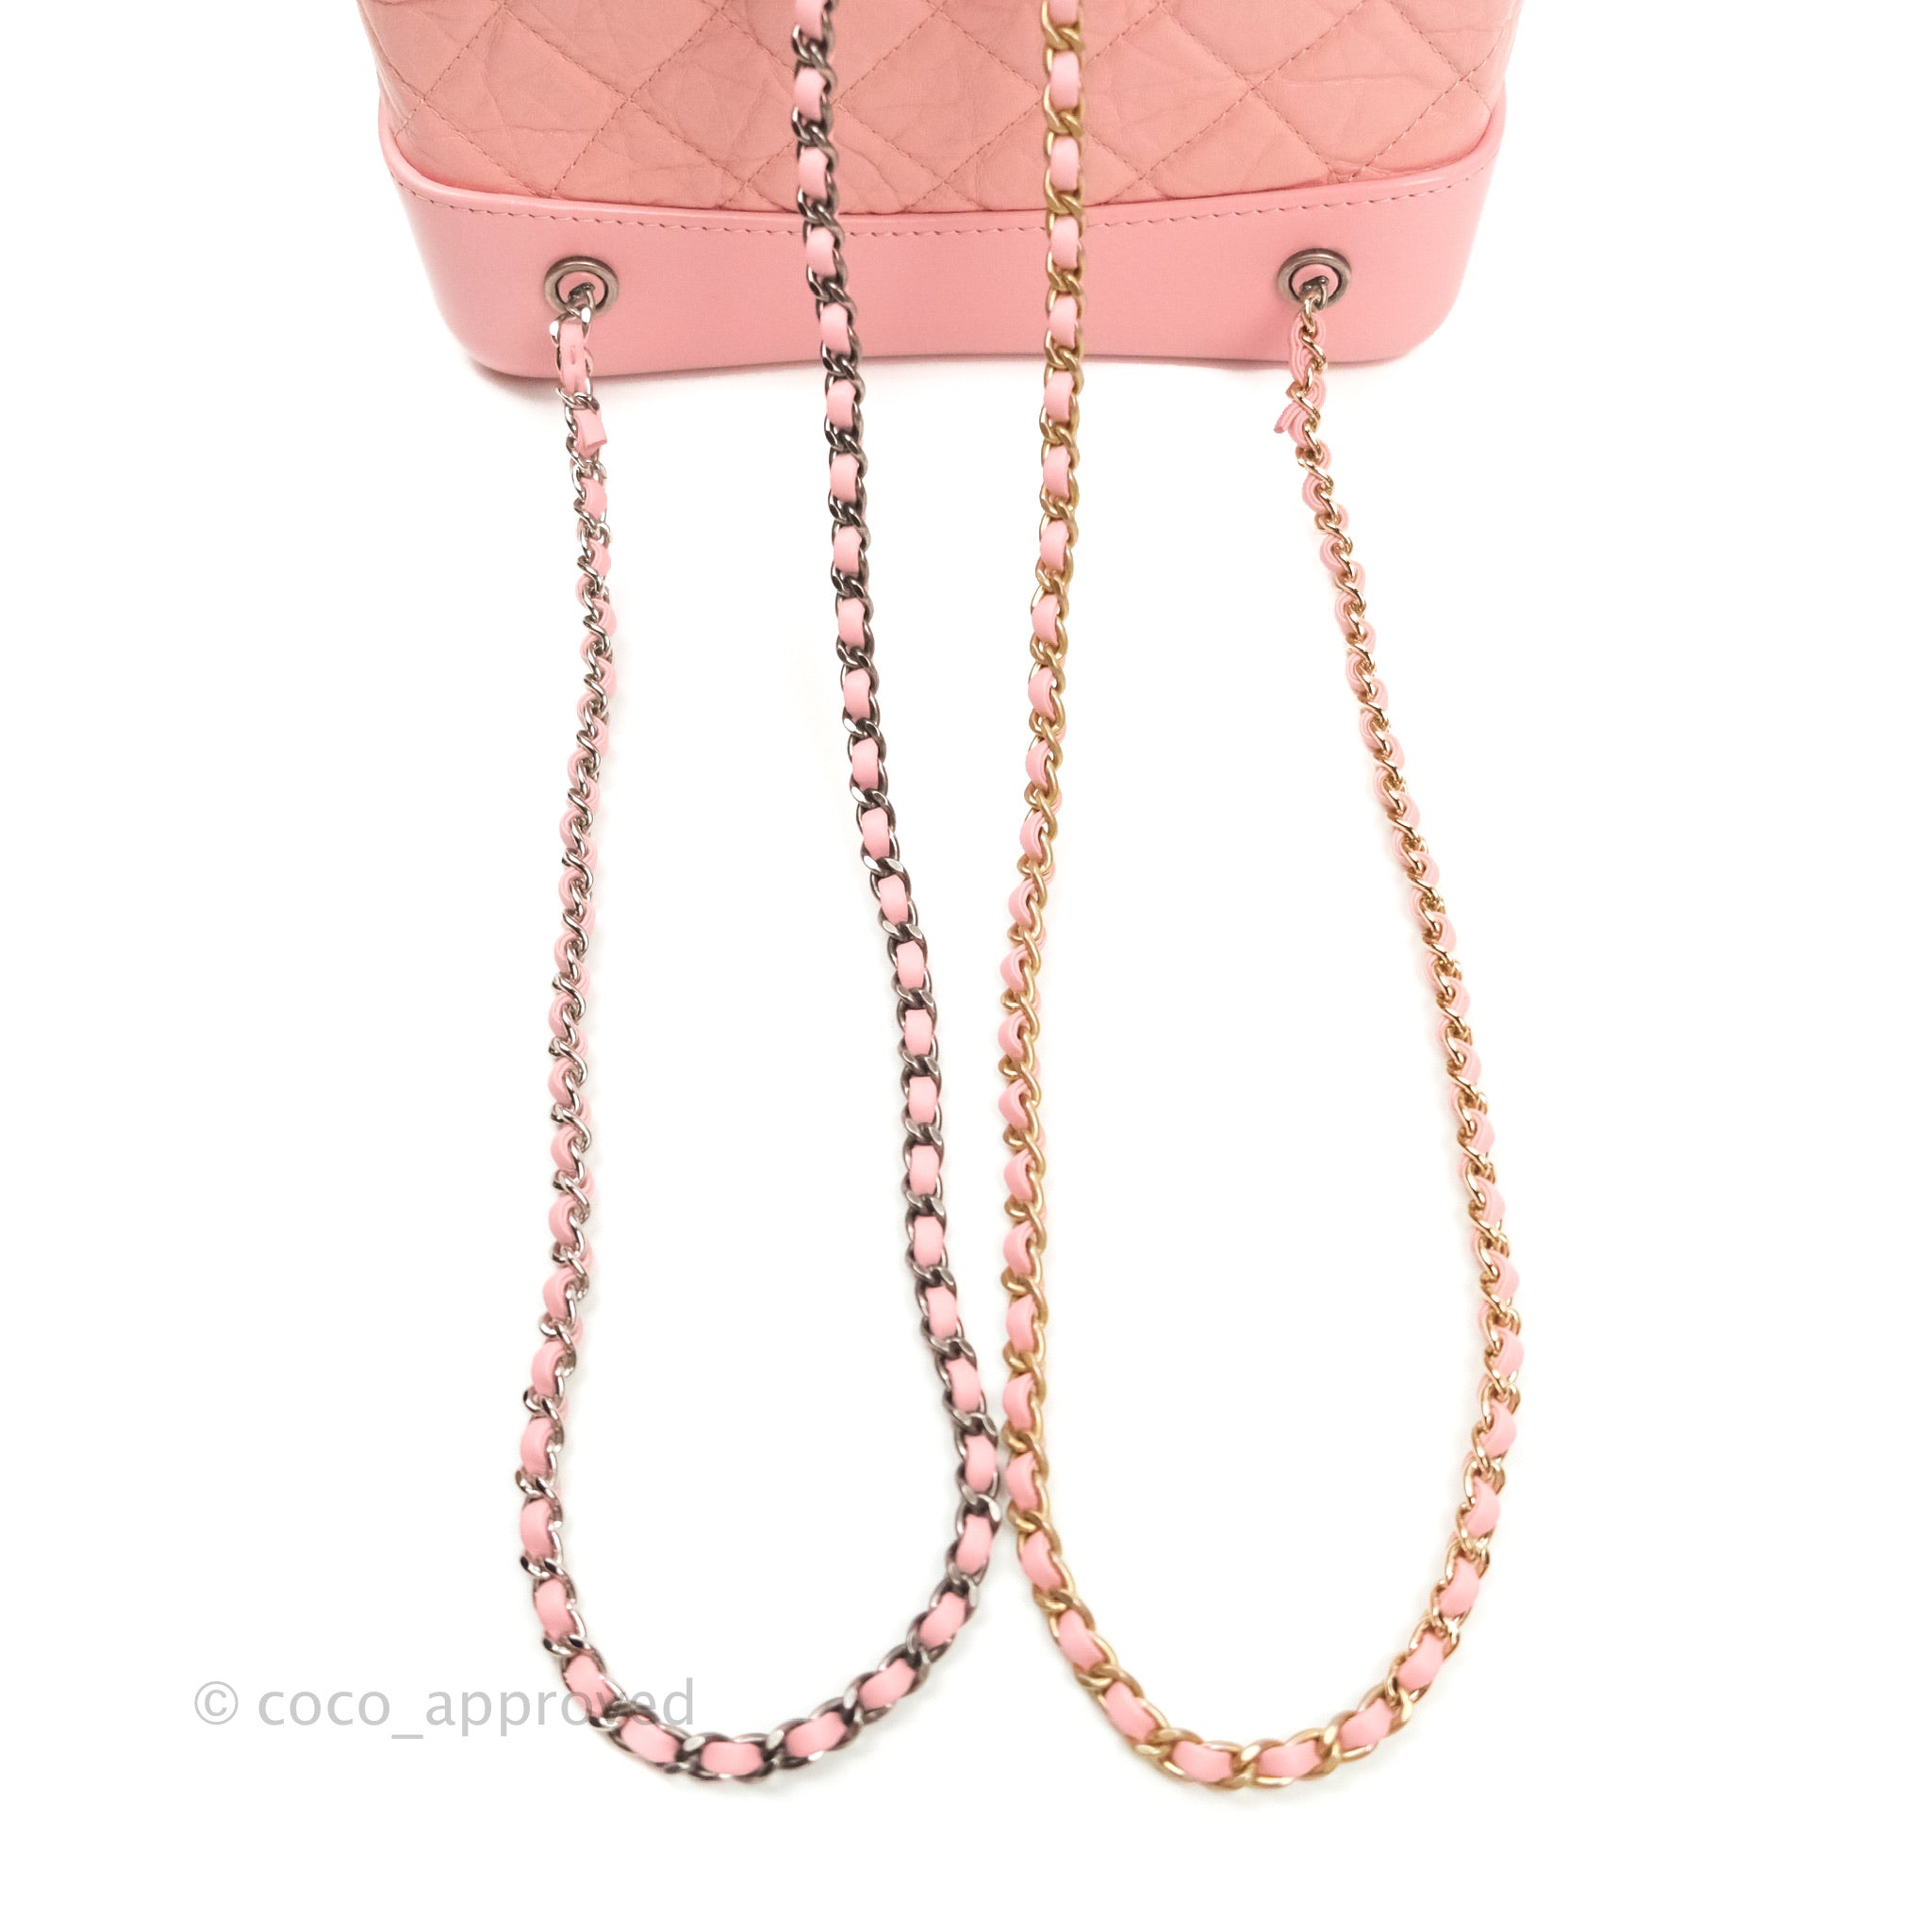 Chanel Gabrielle Backpack Quilted Calfskin Small at 1stDibs  chanel  gabrielle backpack small, chanel gabrielle backpack pink, chanel gabriel  backpack